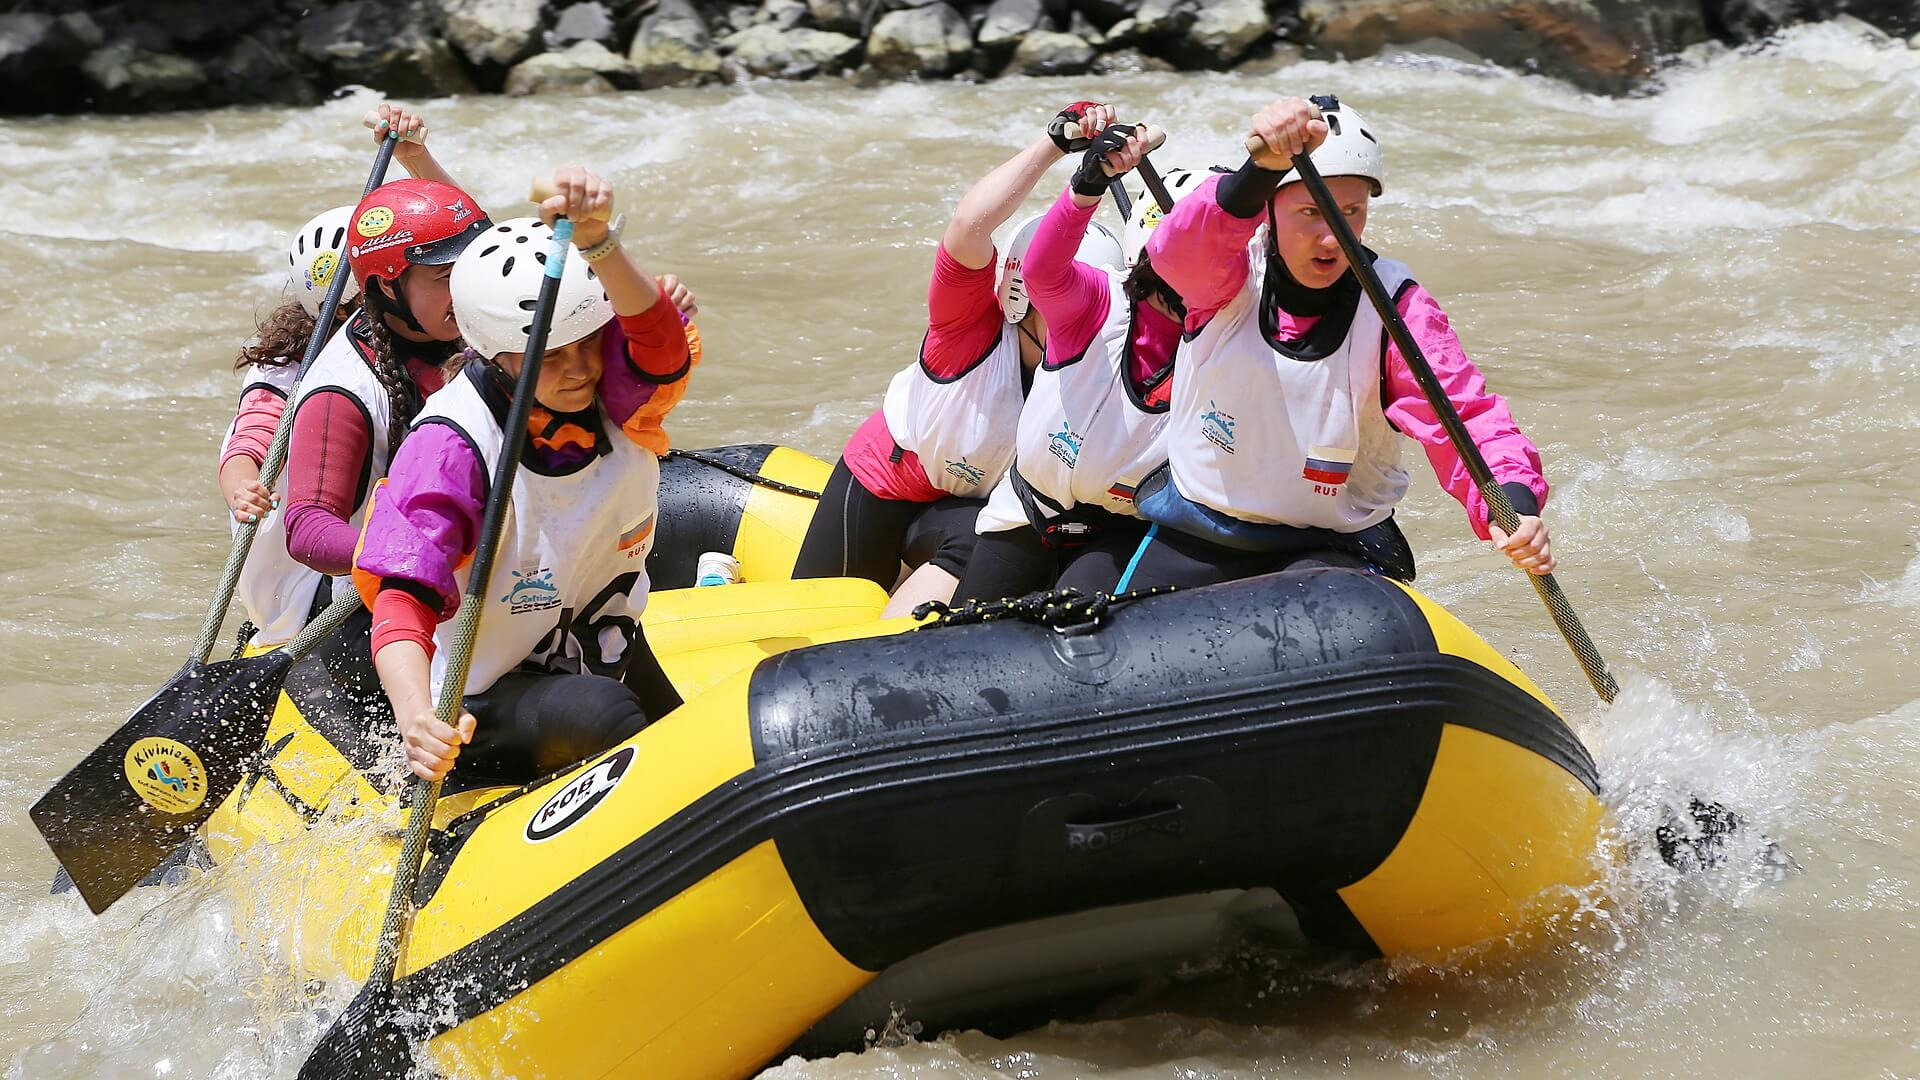 Rafting: A professional whitewater boating women's team of Russia during the maneuvering in Altay. 1920x1080 Full HD Wallpaper.